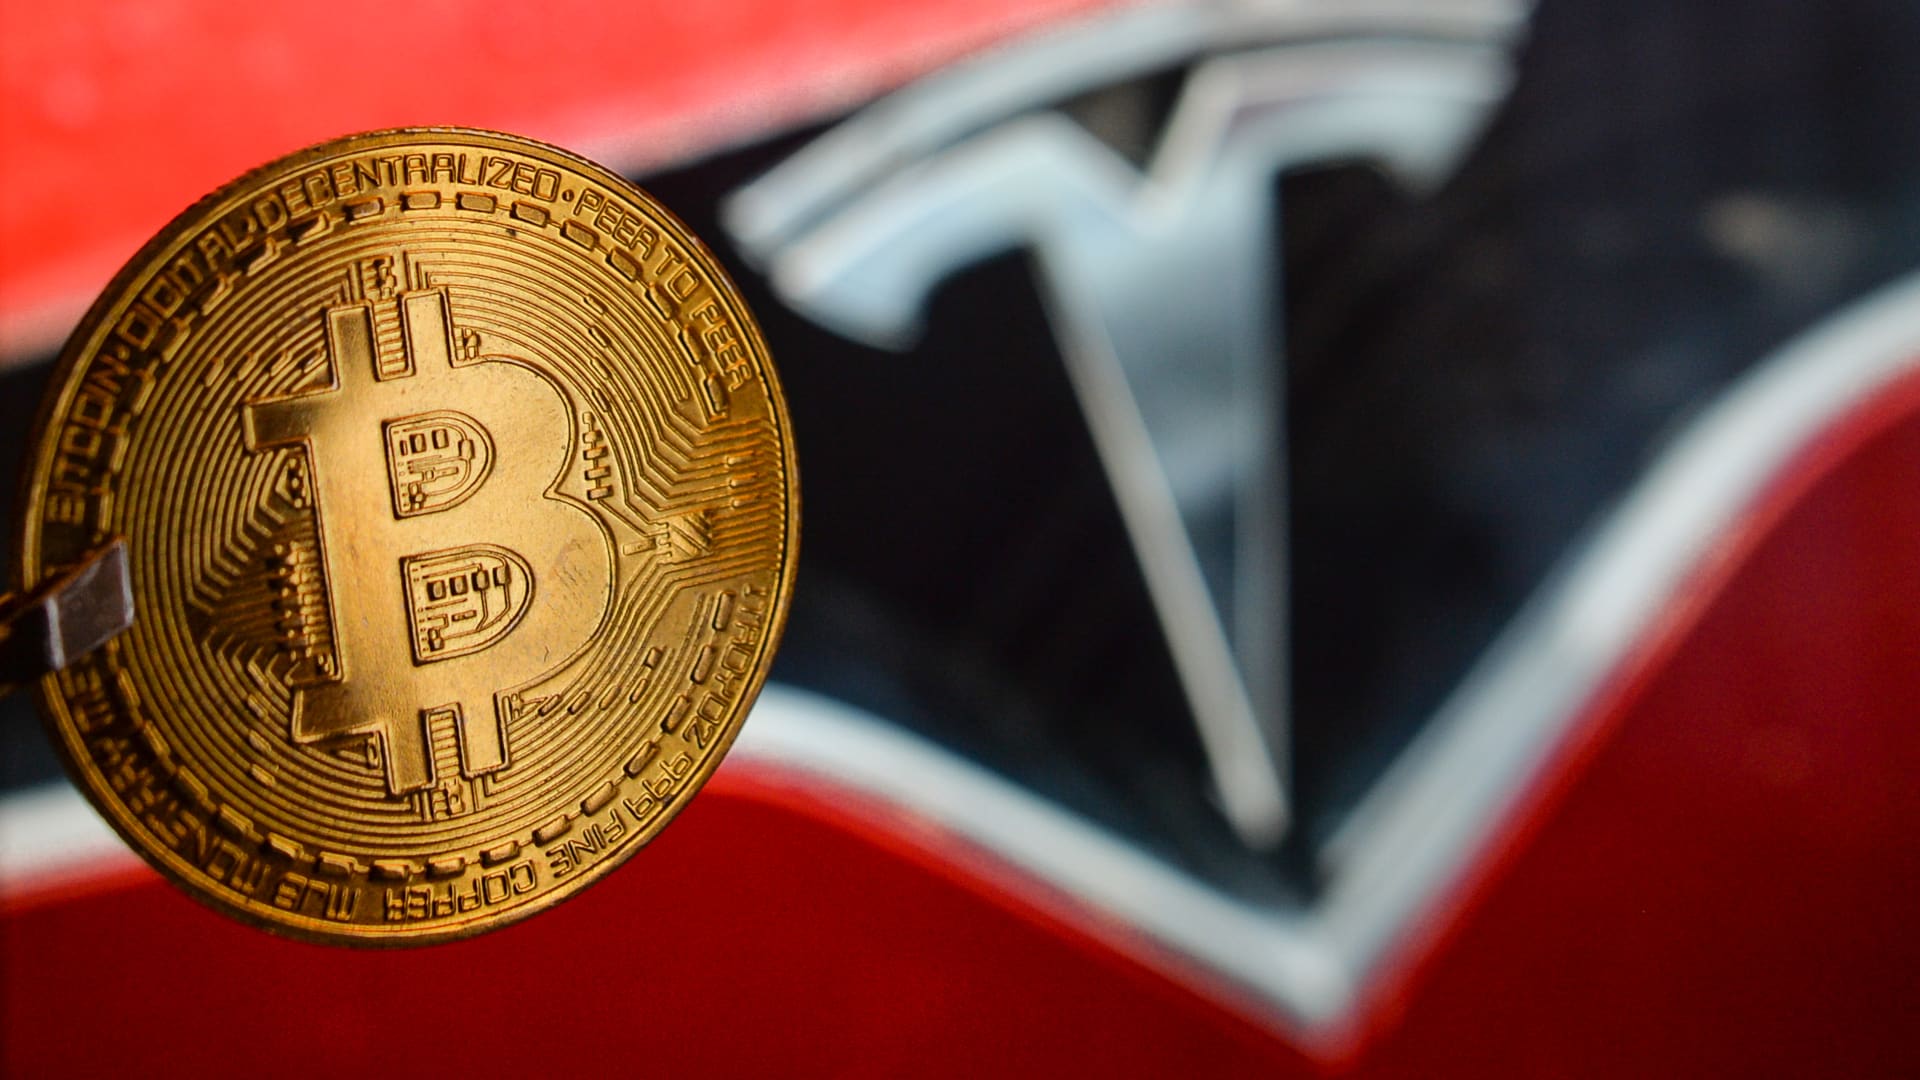 Tesla has dumped 75% of its bitcoin holdings a year after touting 'long-term potential'